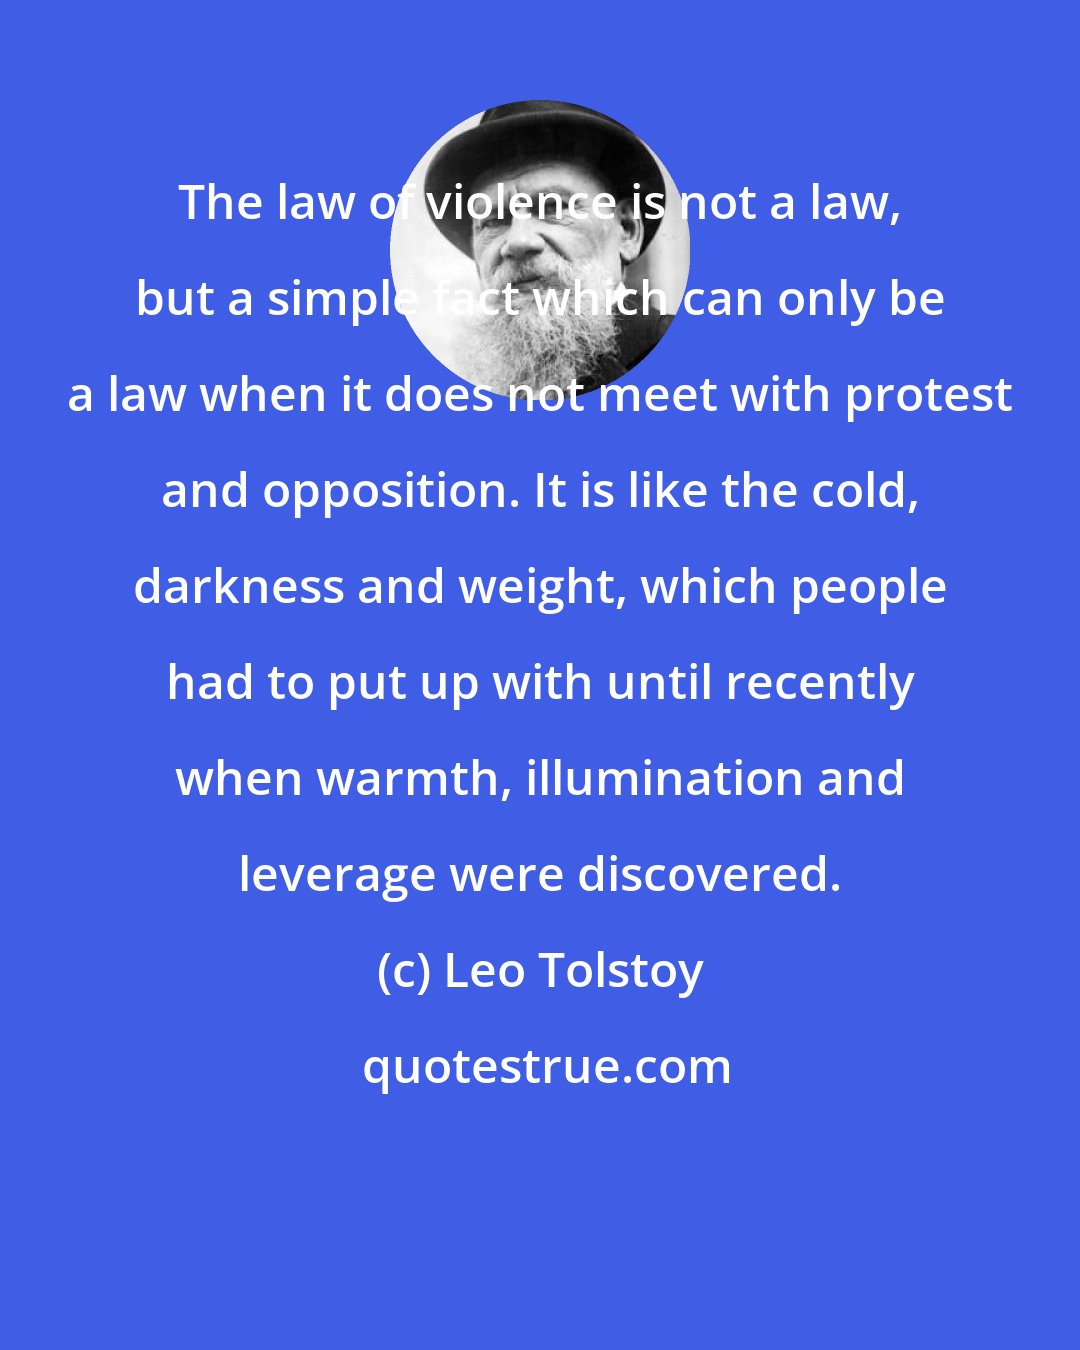 Leo Tolstoy: The law of violence is not a law, but a simple fact which can only be a law when it does not meet with protest and opposition. It is like the cold, darkness and weight, which people had to put up with until recently when warmth, illumination and leverage were discovered.